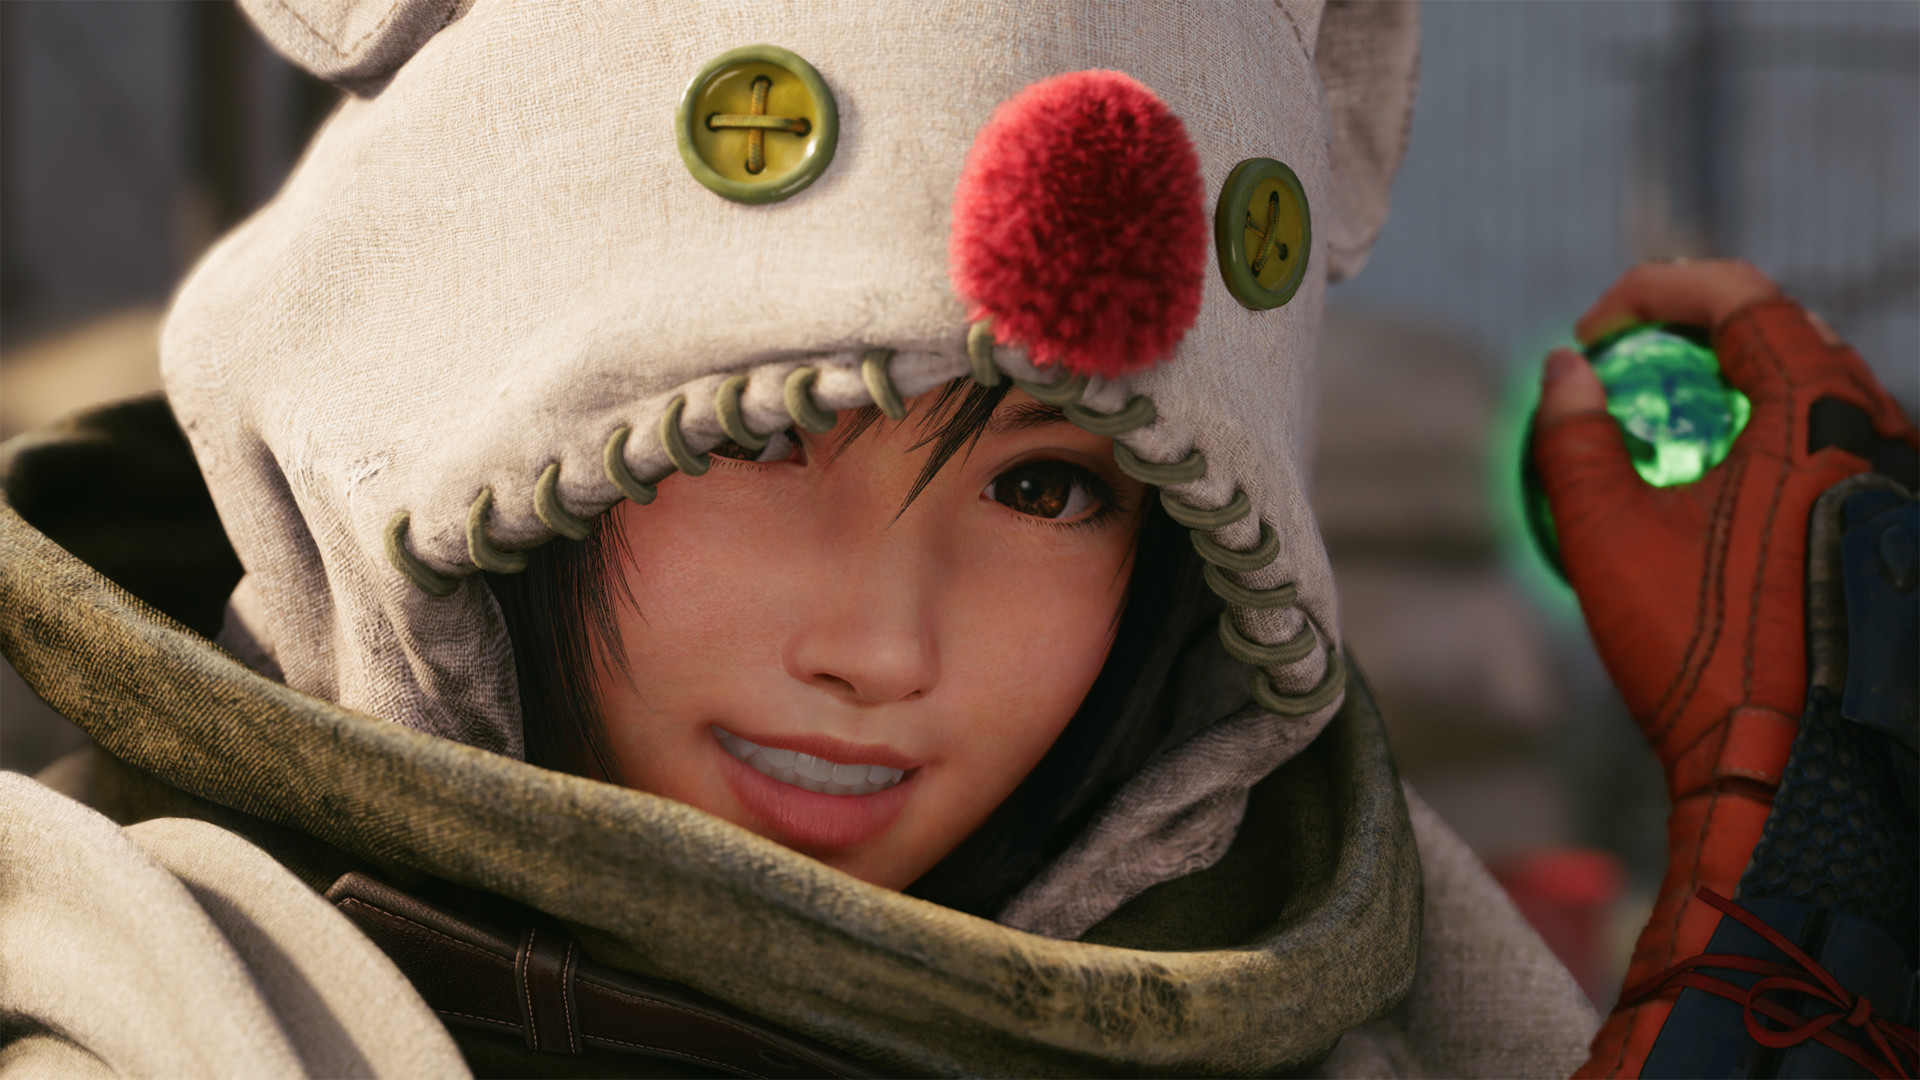 Final Fantasy 7 Remake's Yuffie Kitsuragi wearing a Moogle hood and holding a sphere of green materia